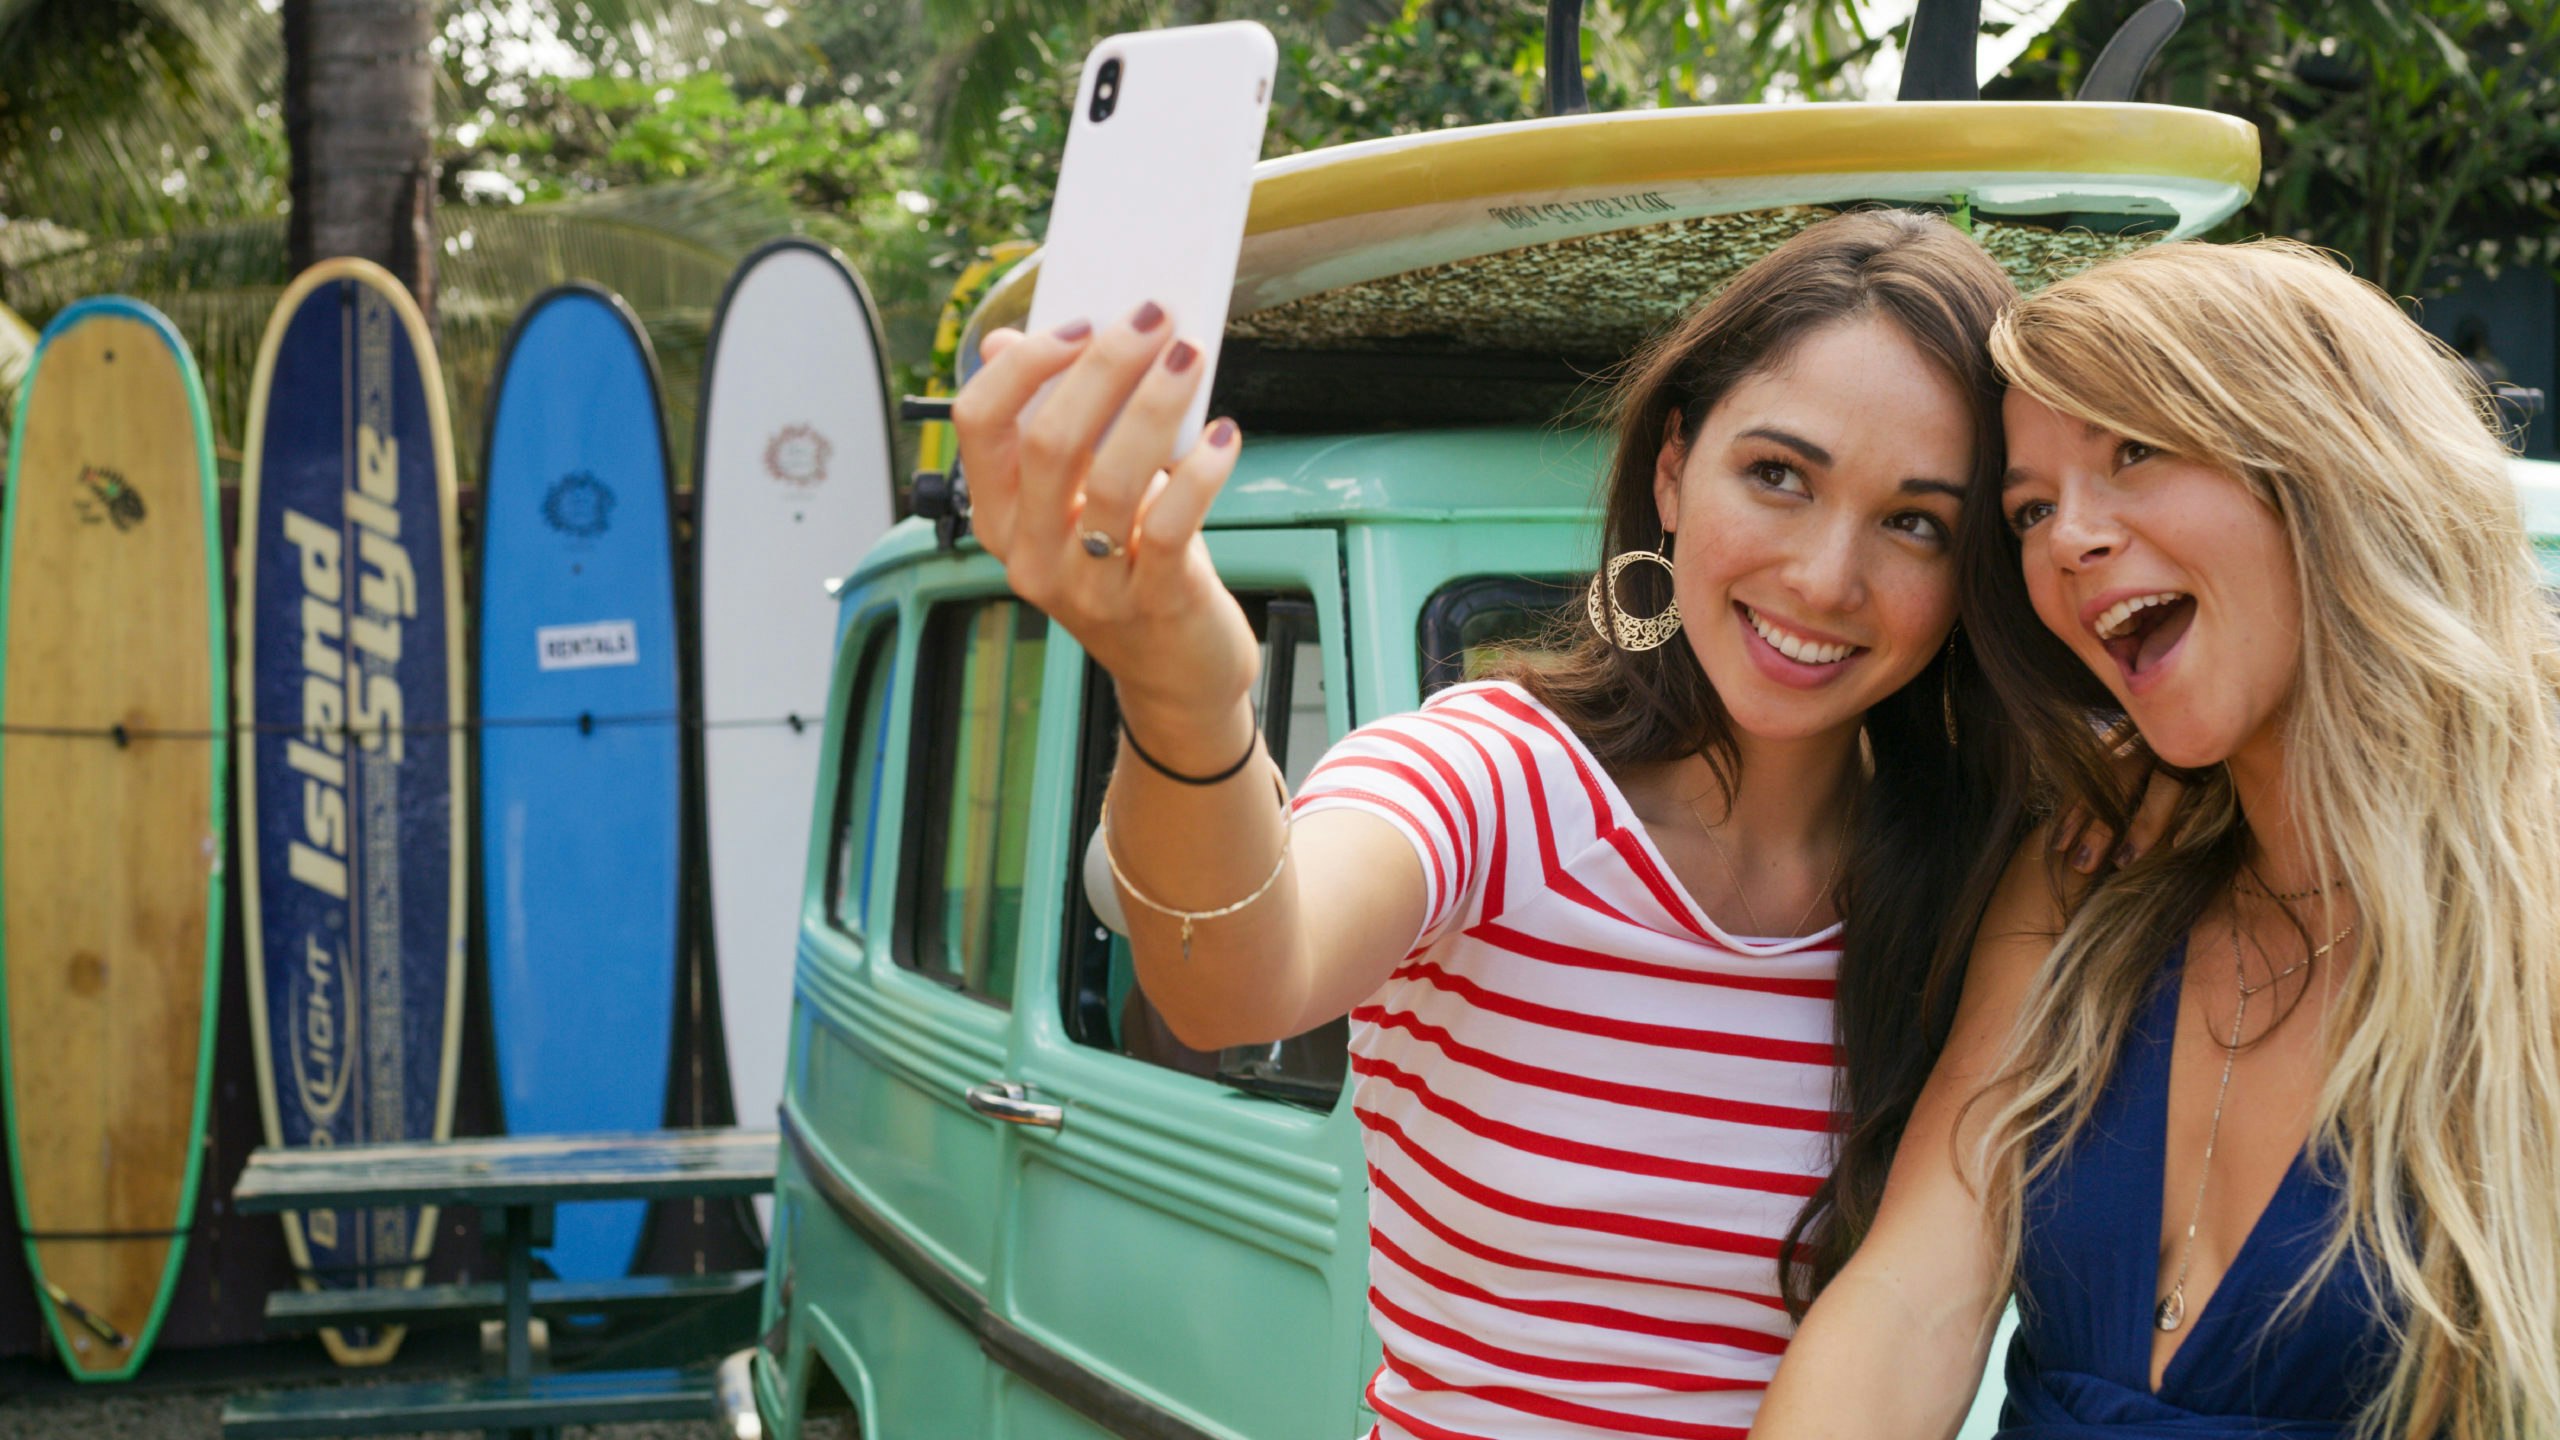 Two women standing in front of van and surfboards take a selfie